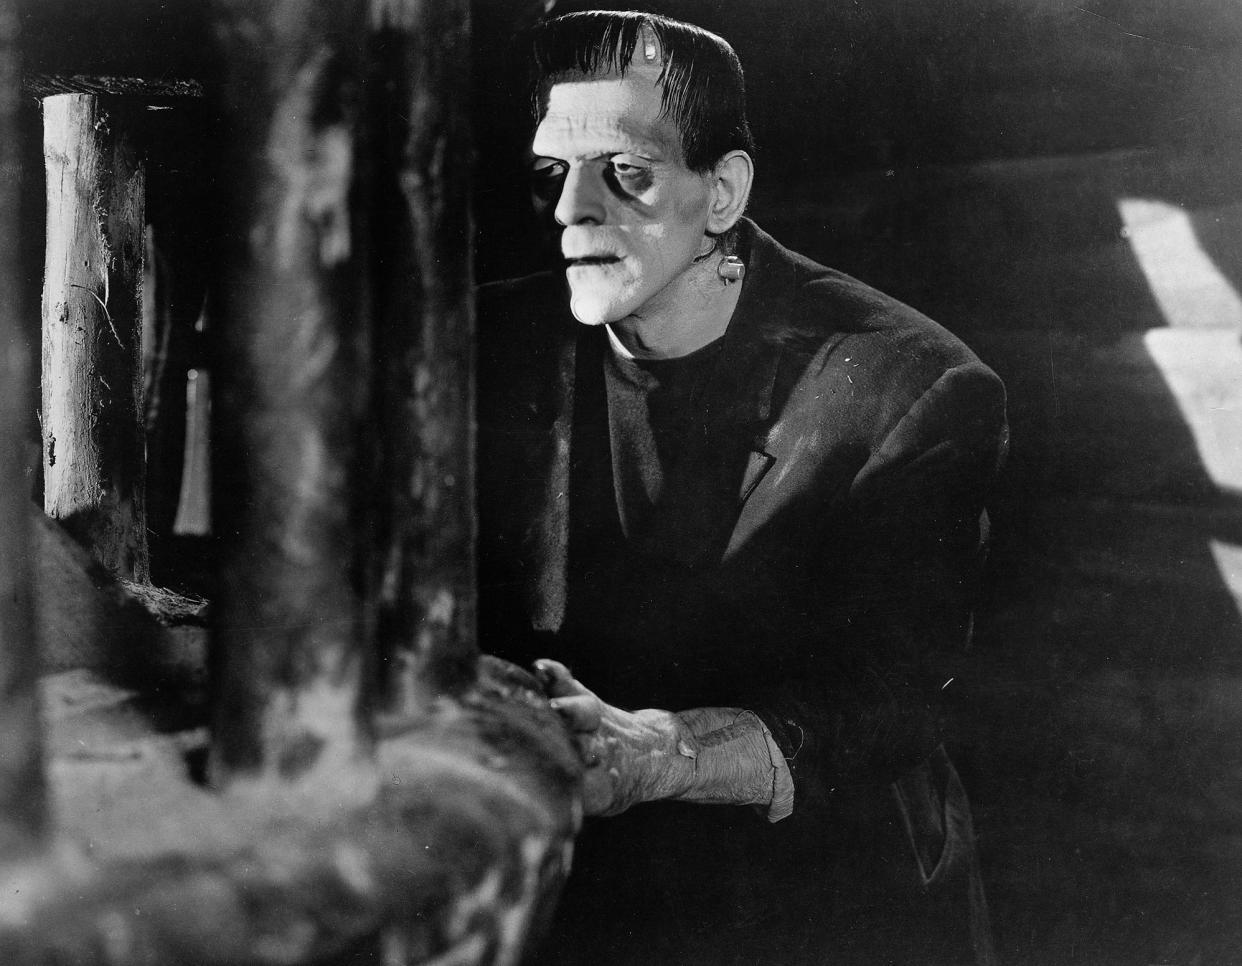 Boris Karloff starred as the iconic monster in the 1931 horror classic "Frankenstein."